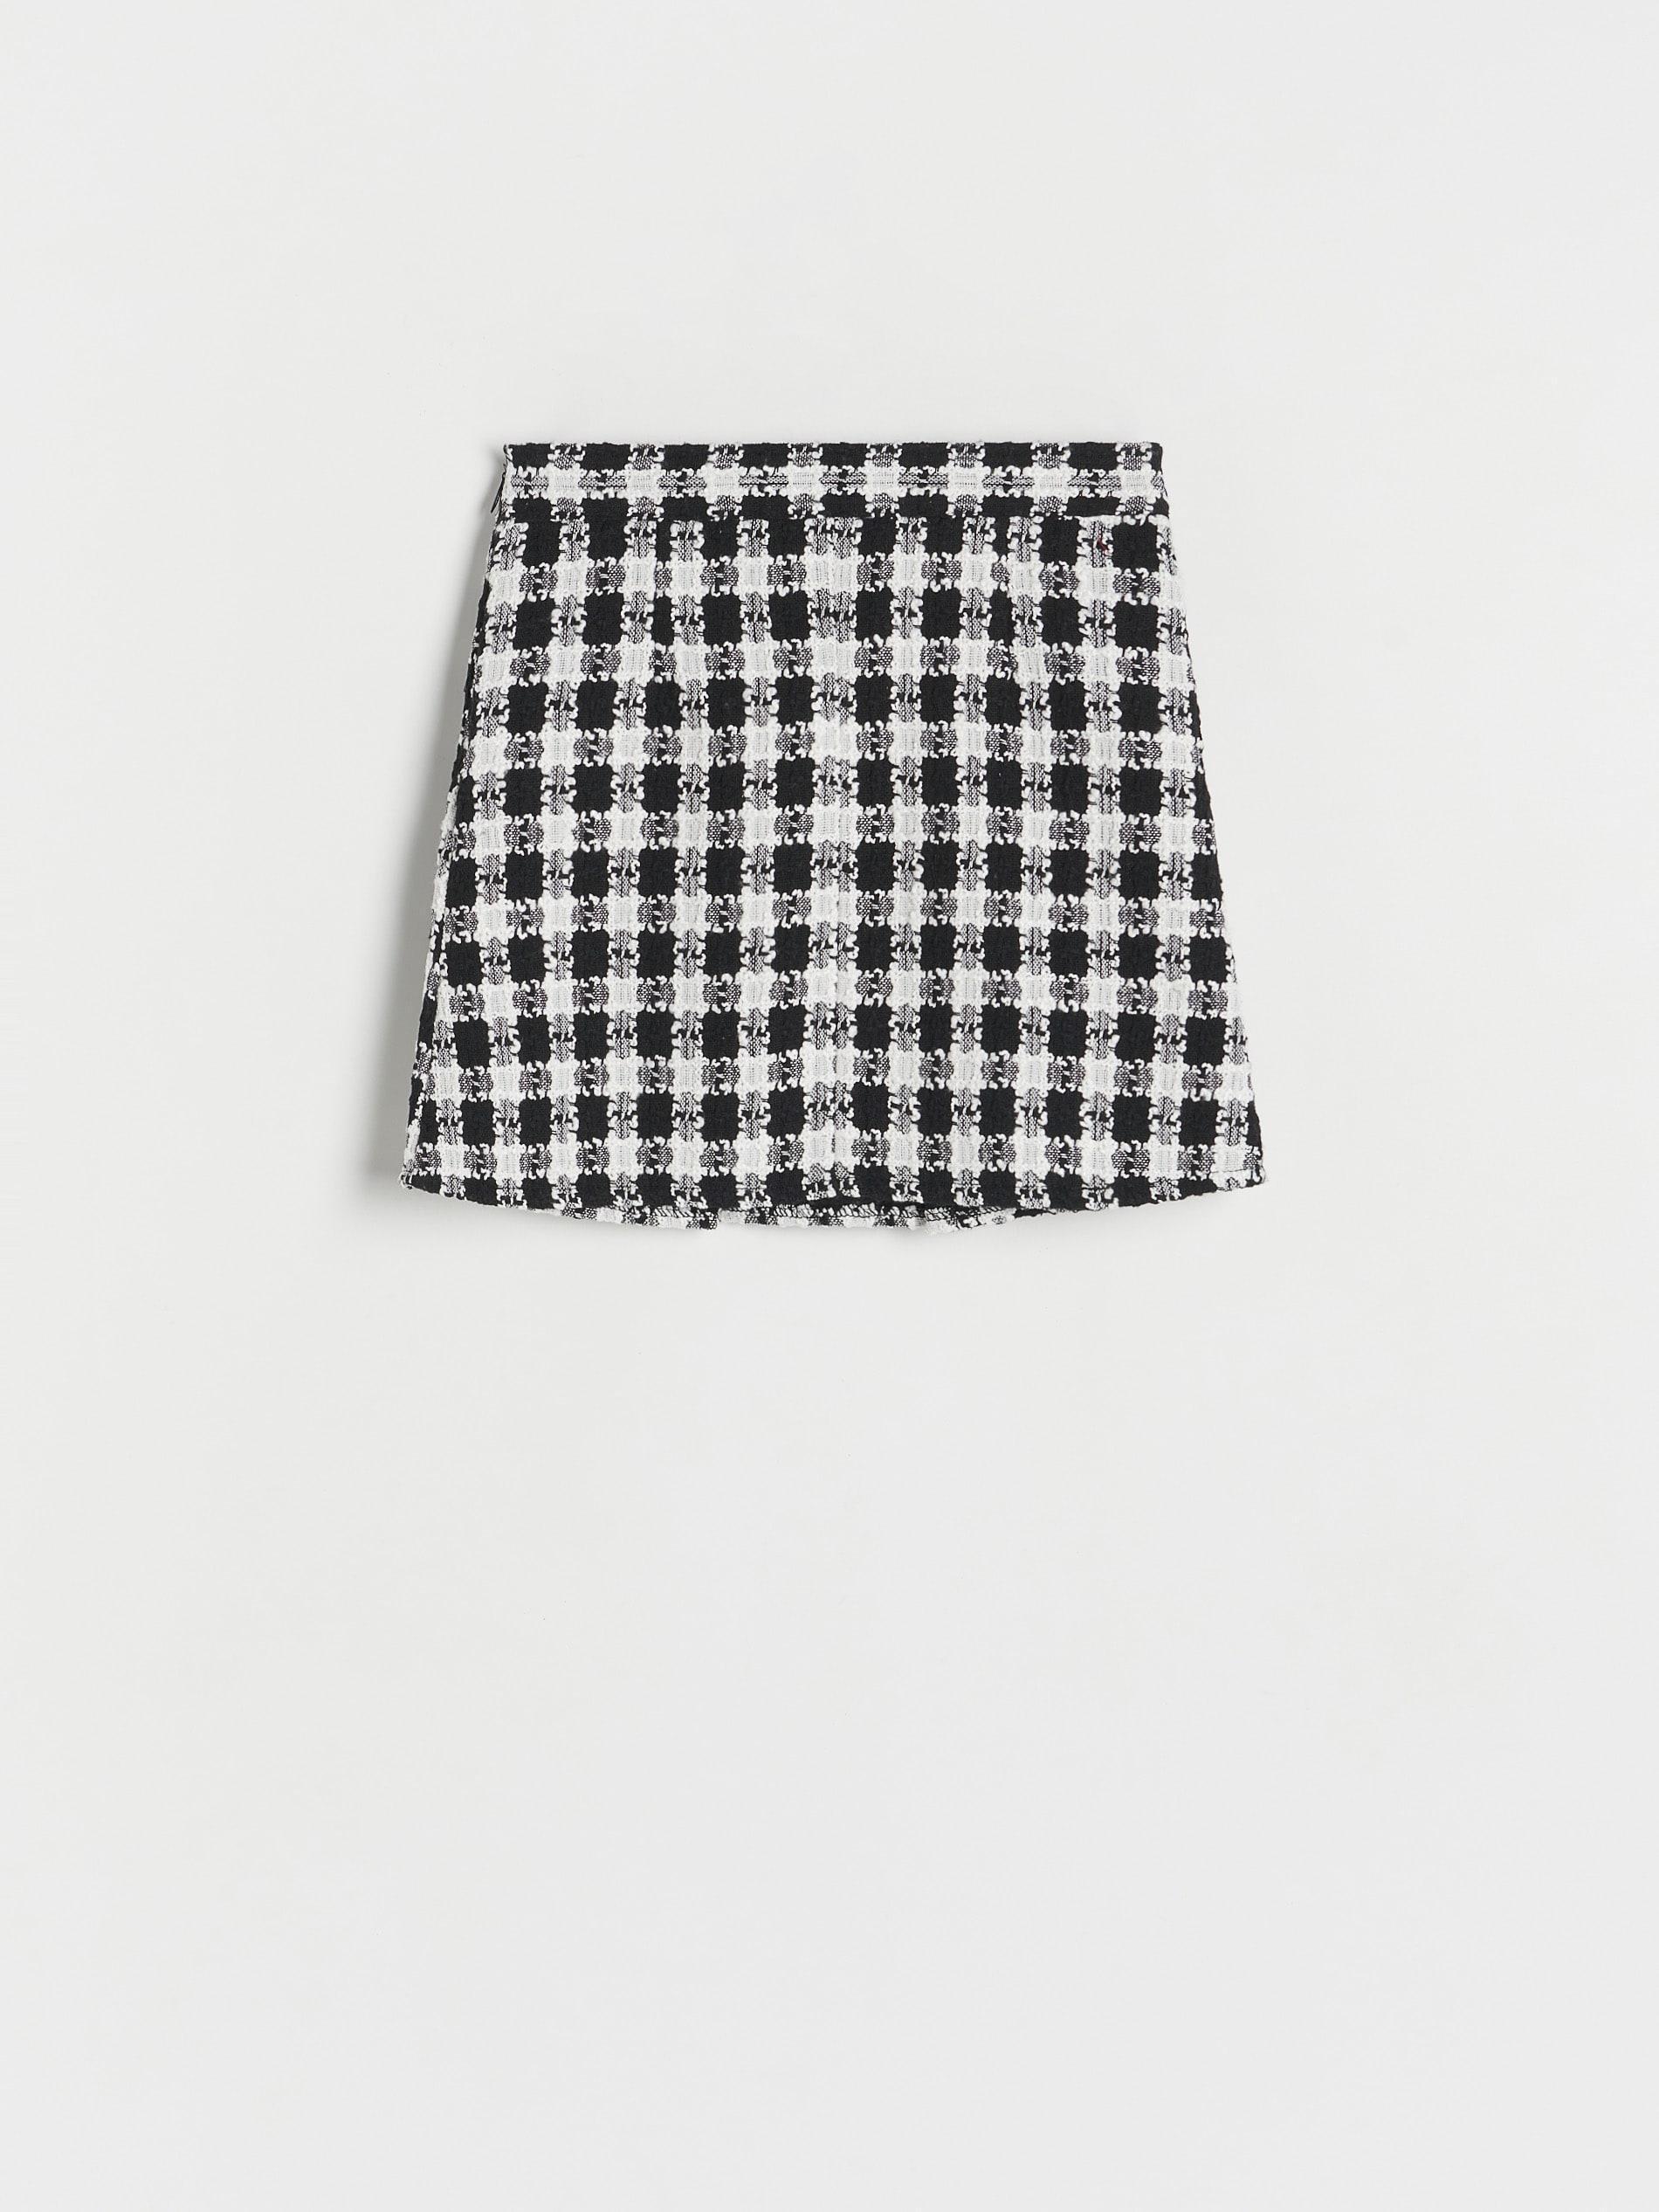 Reserved - Multicolour Skirt With Pleats, Kids Girls